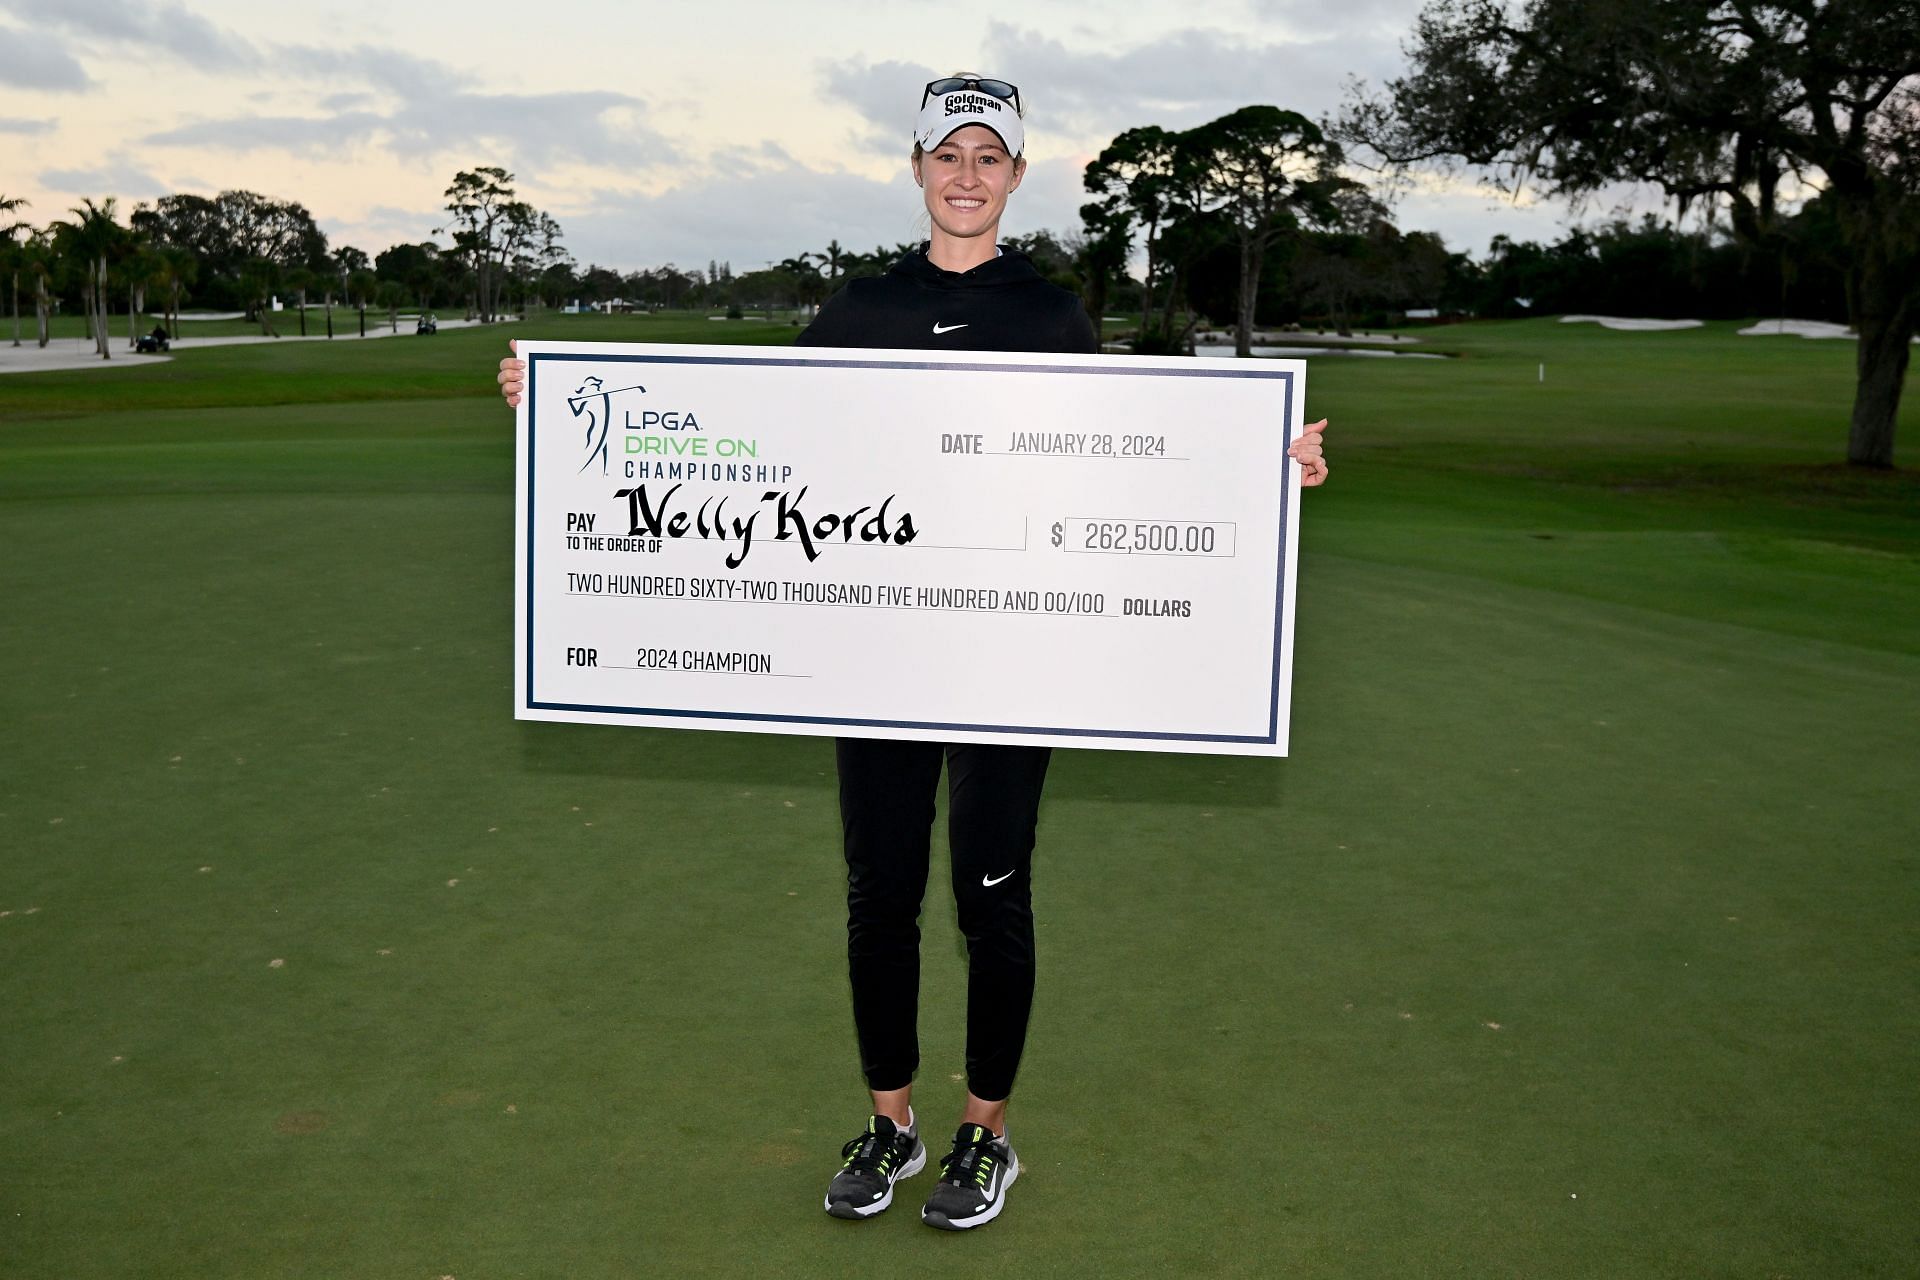 How much did Nelly Korda win at the 2024 LPGA Drive On Championship? Prize money payout explored